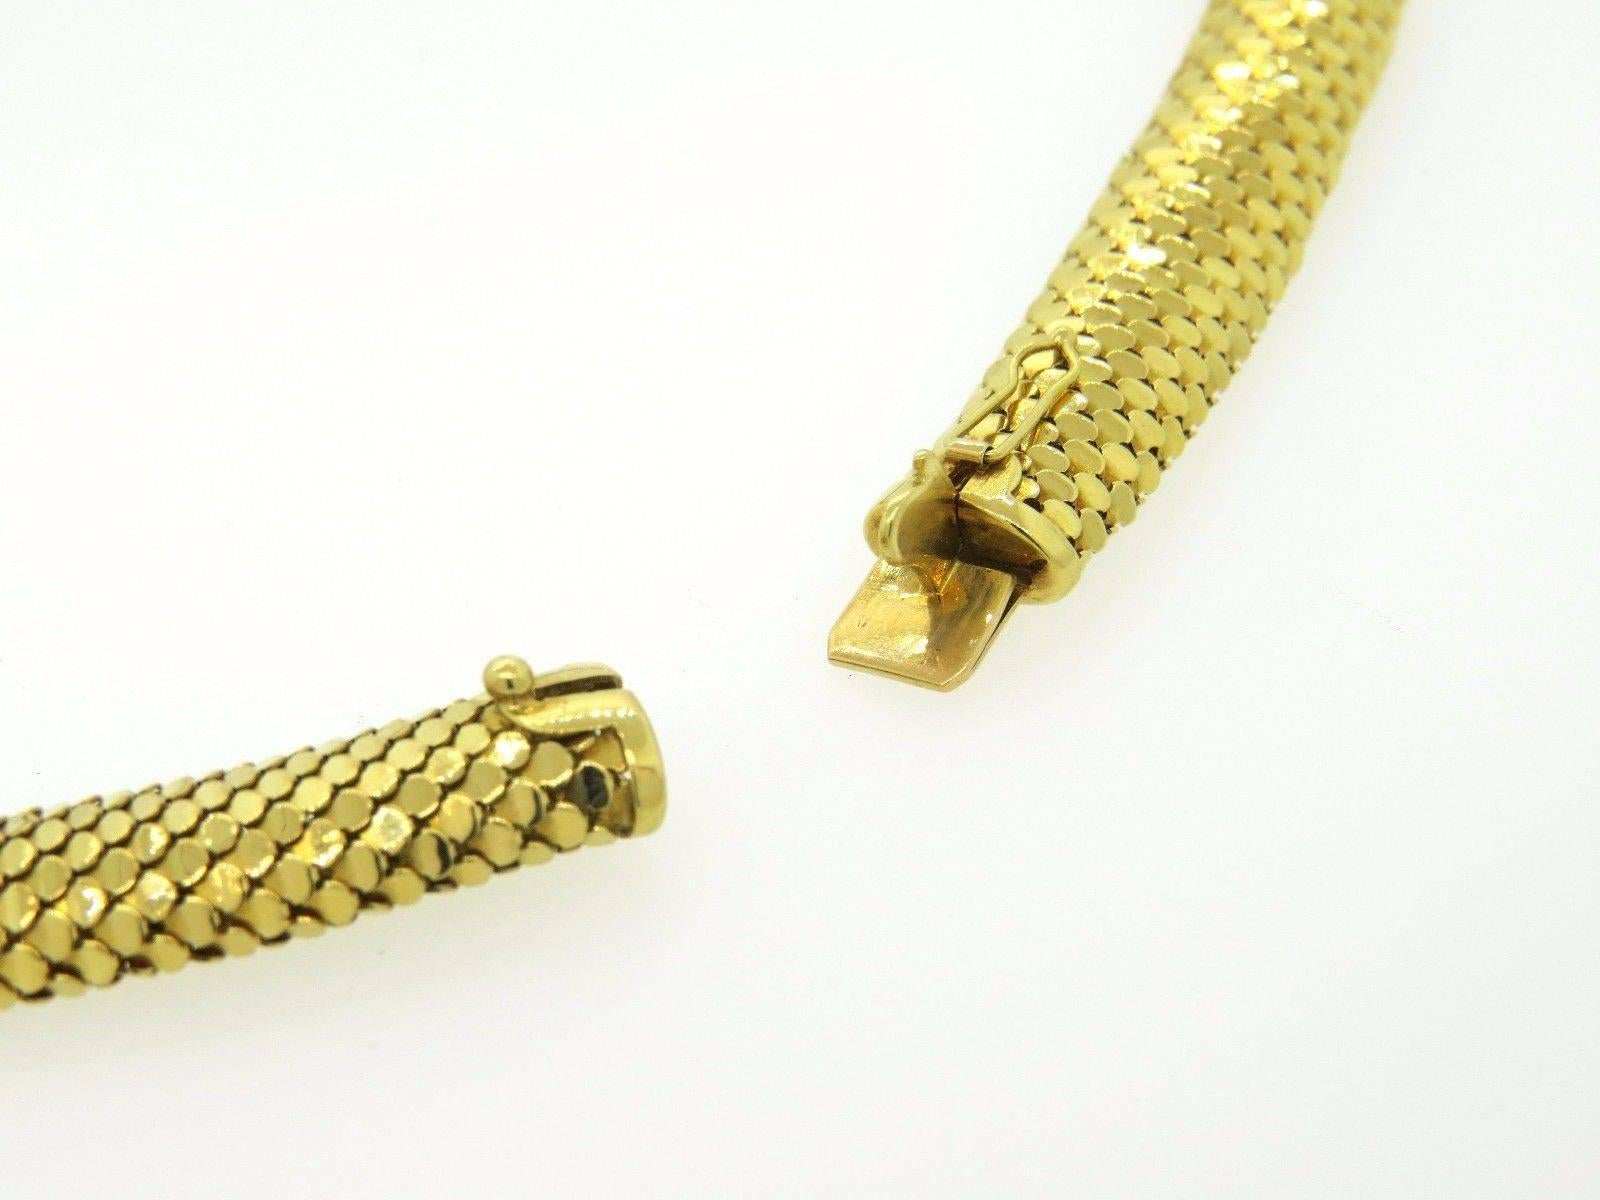 An 18k yellow gold snake necklace by Tiffany & Co.  The necklace measures 16.5